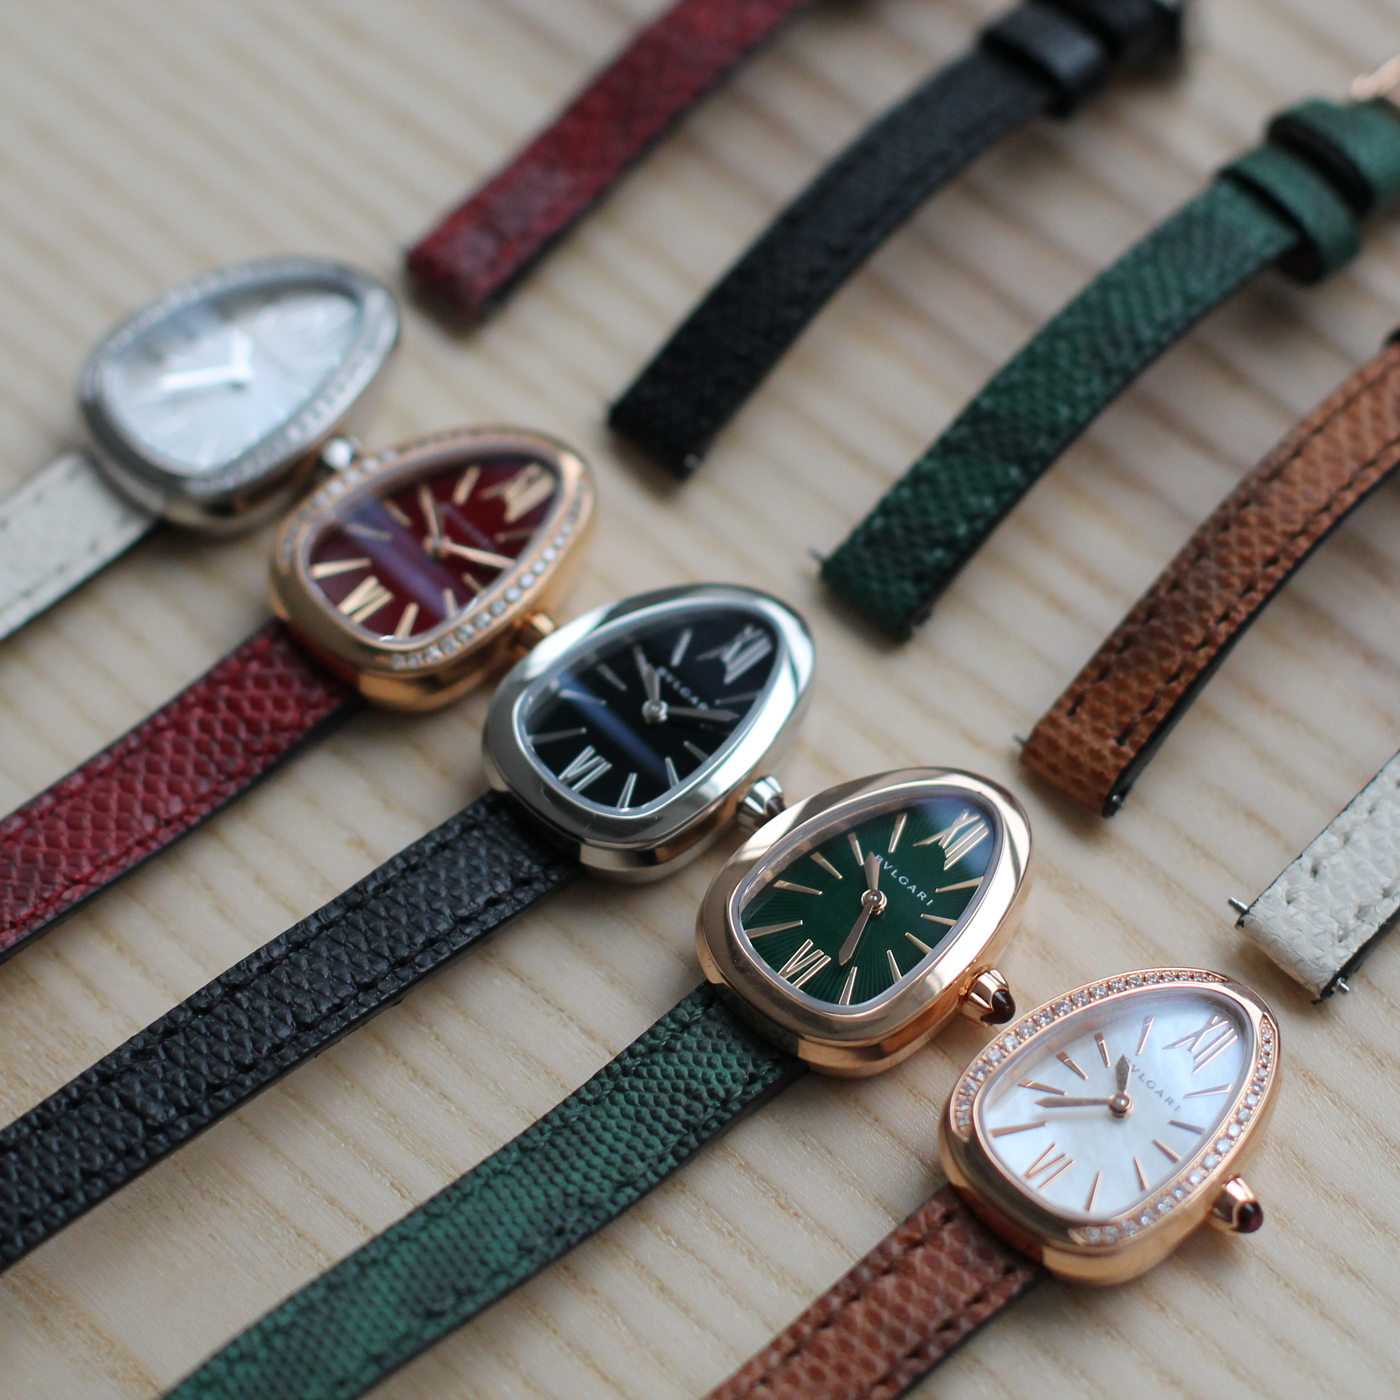 Six of the best easy-to-change watch straps